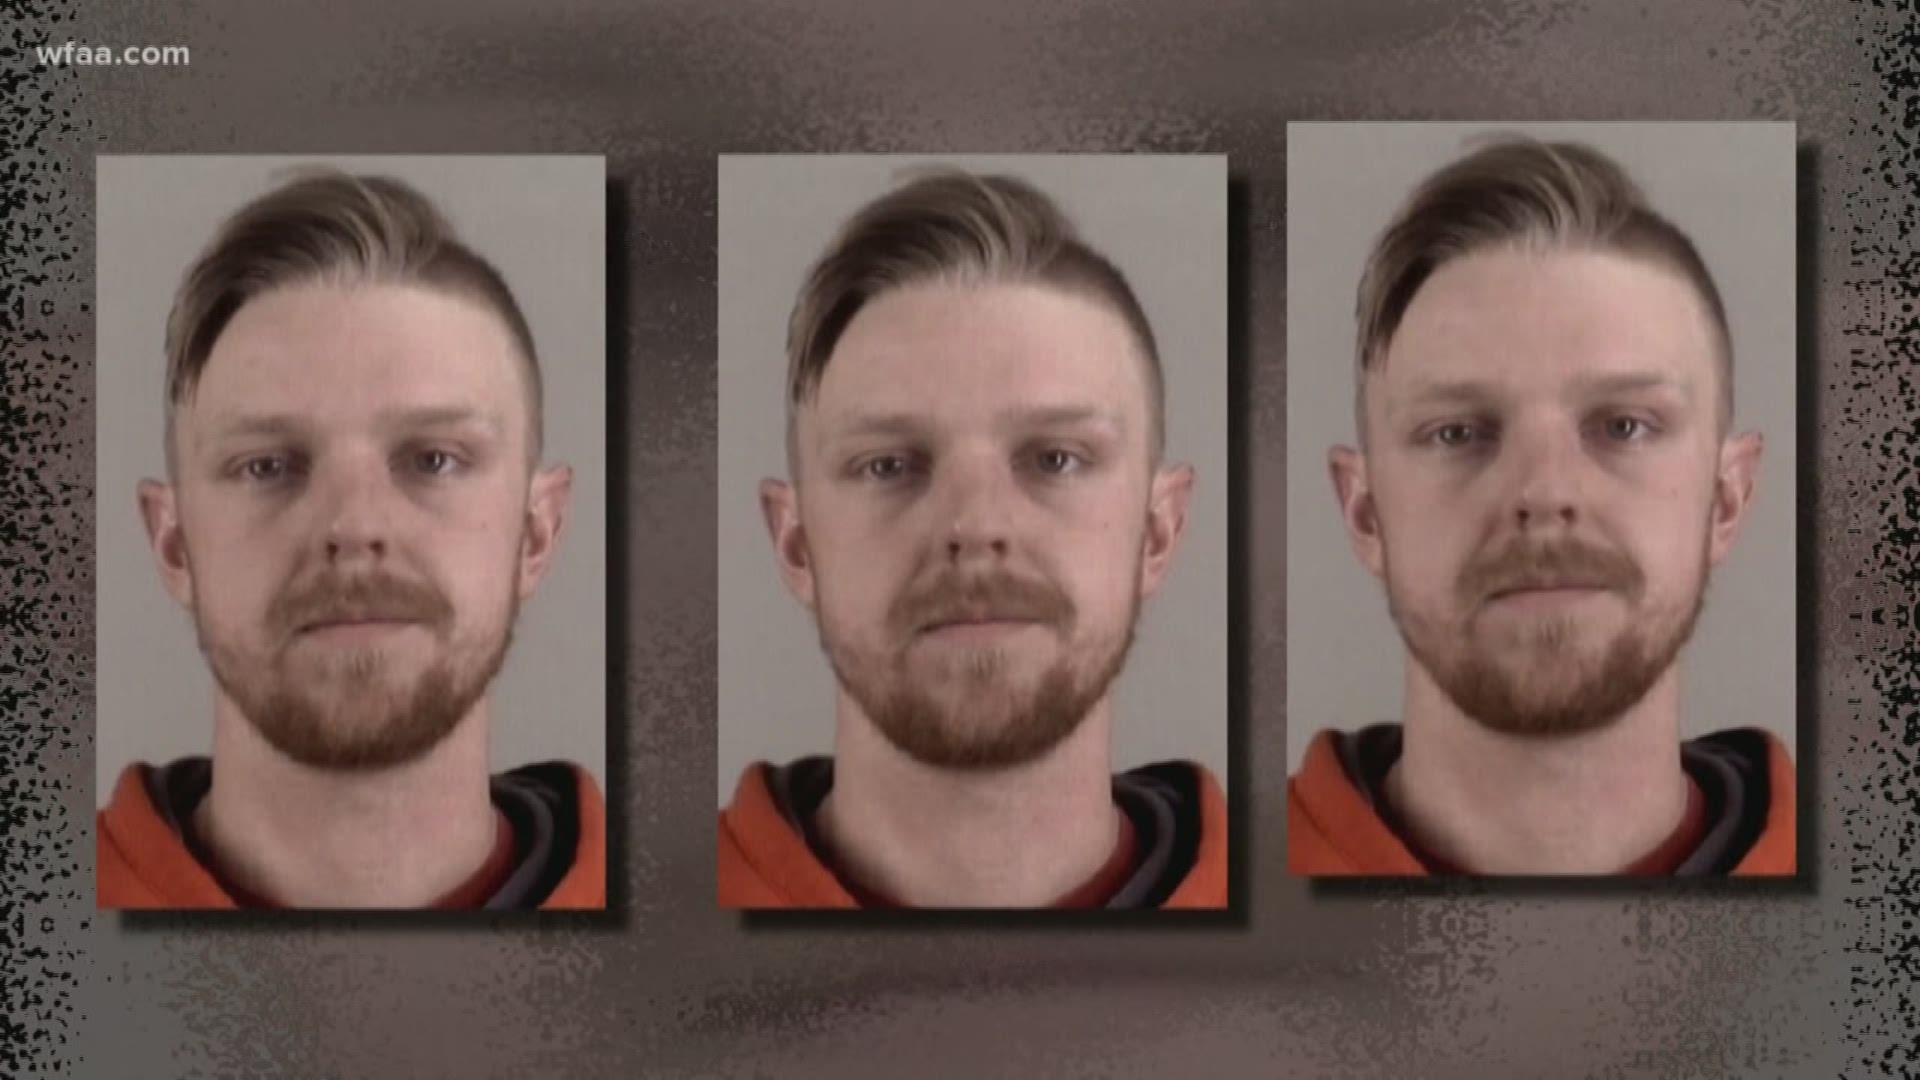  Ethan Couch, the 'affluenza teen' who killed four people while driving drunk in 2013, is shown in his mugshot after violating his probation.